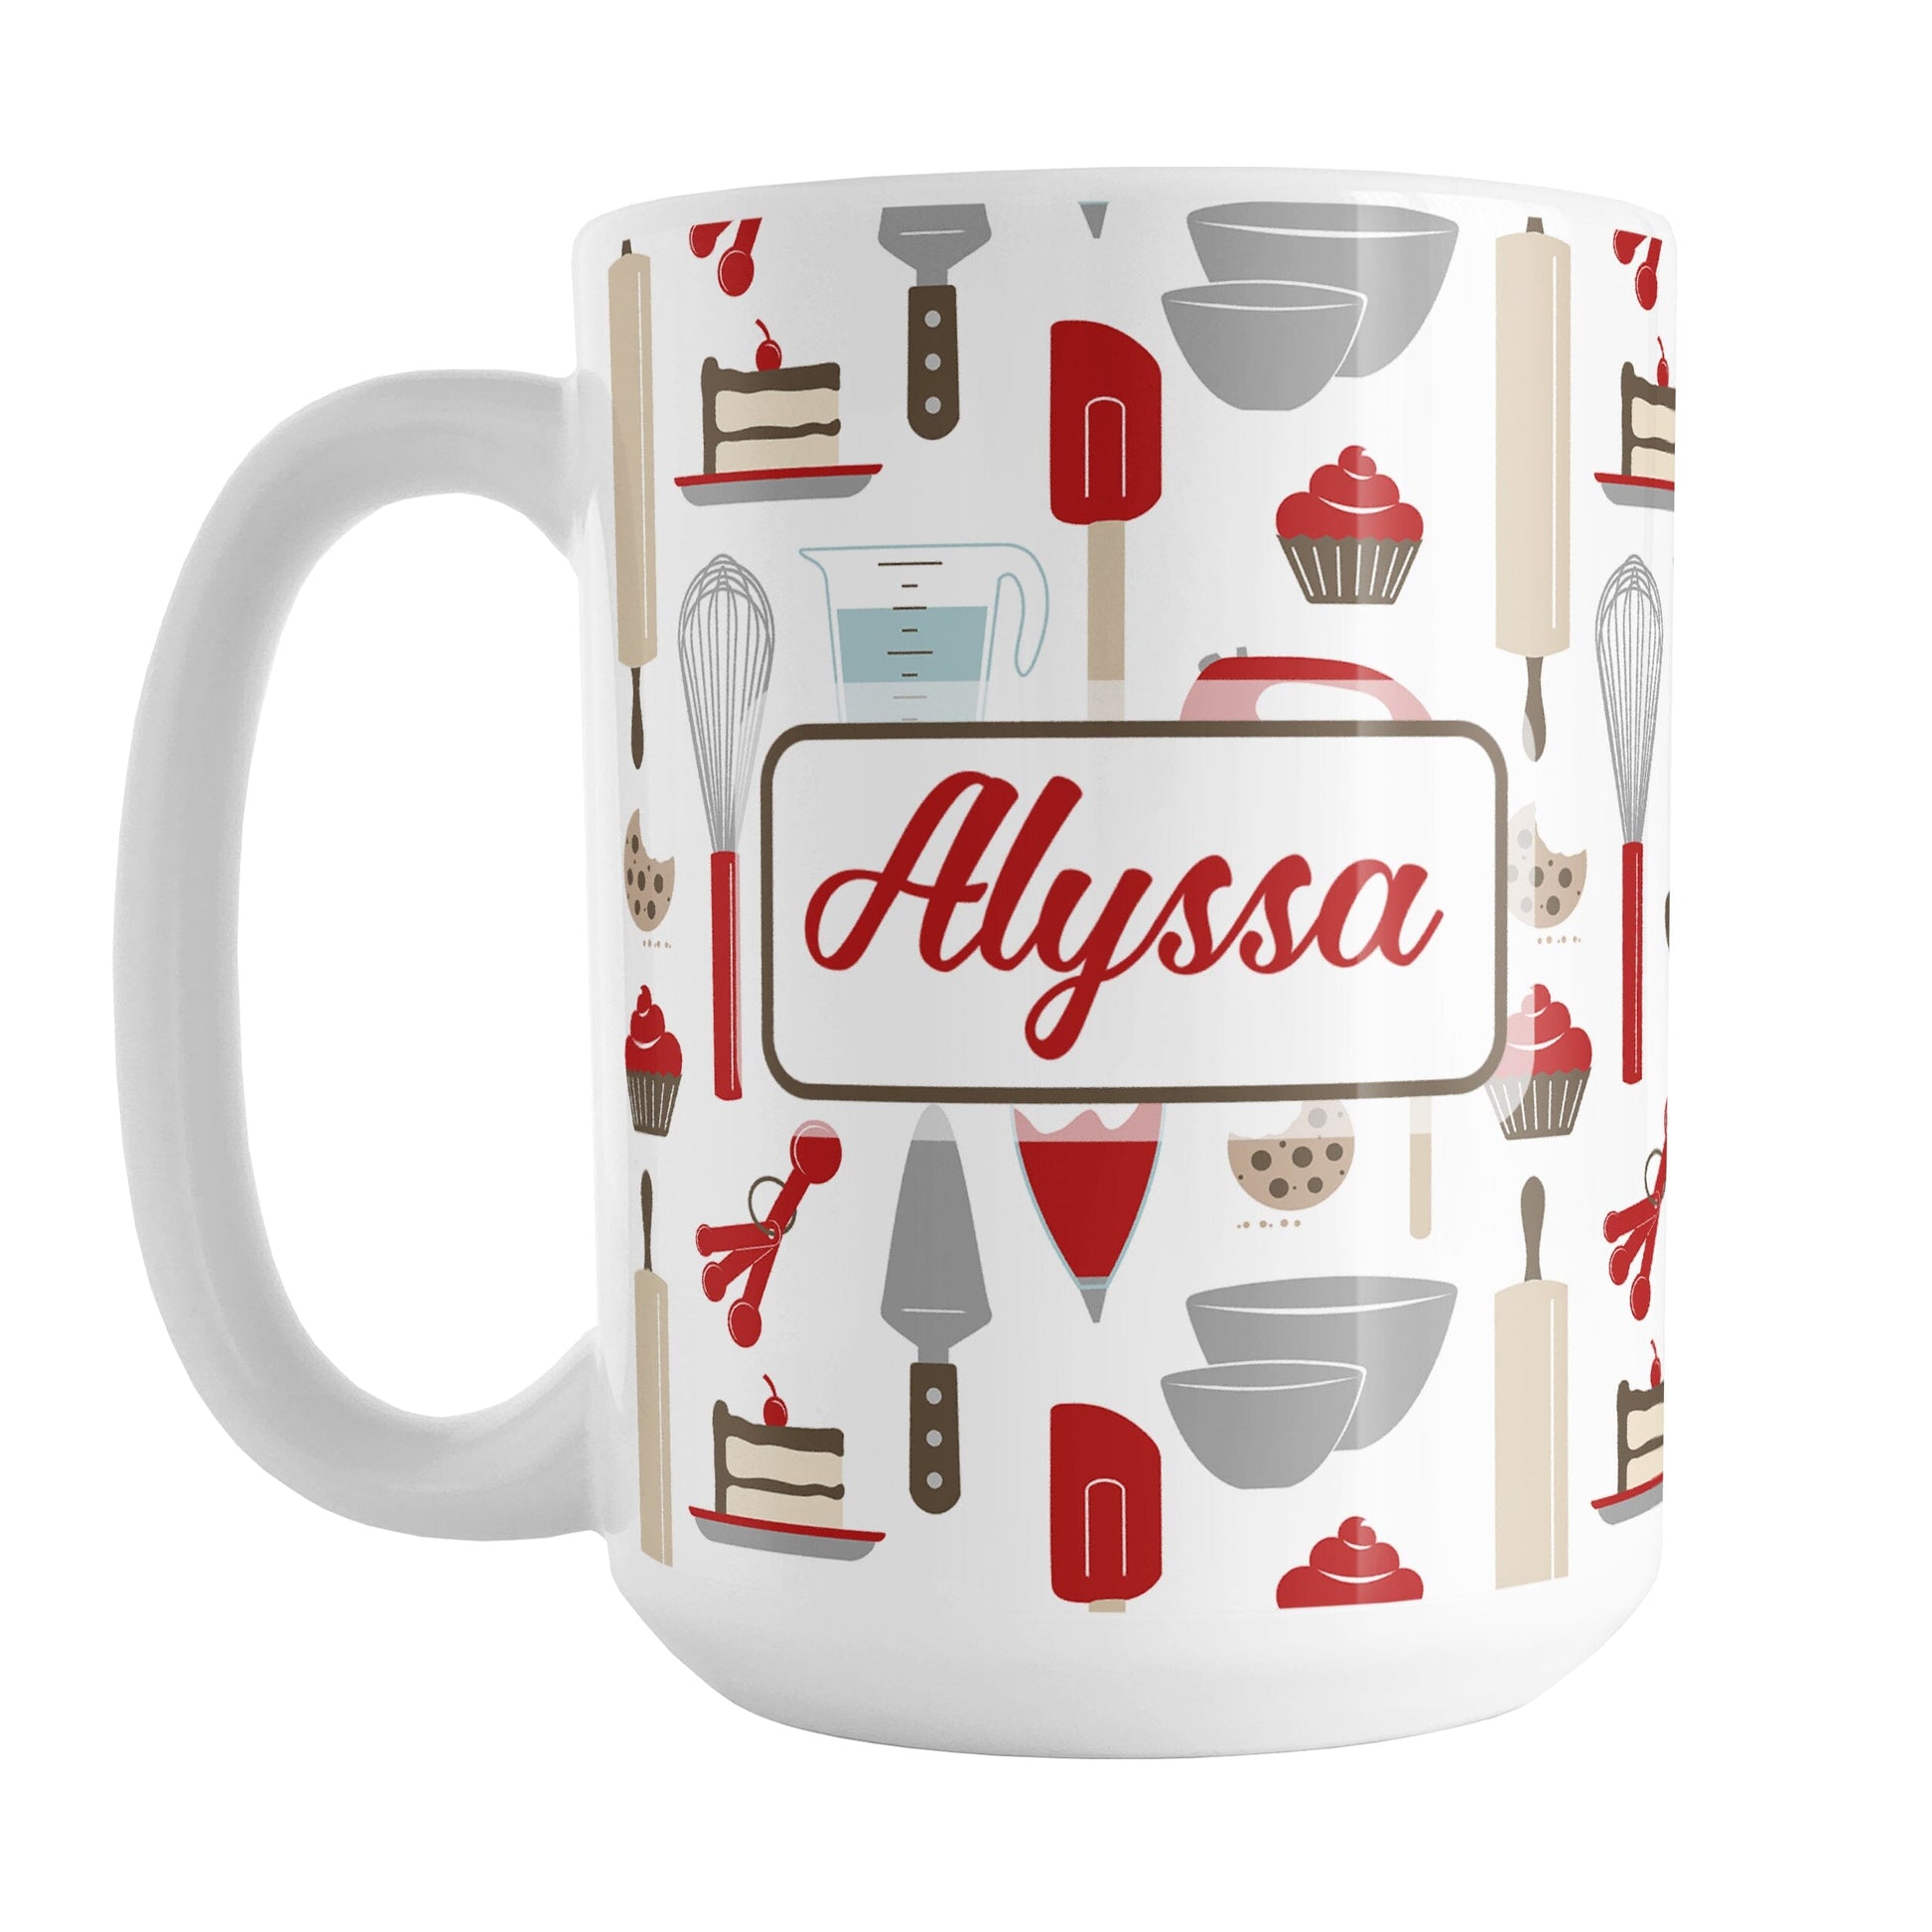 Personalized Red Baking Pattern Mug (15oz) at Amy's Coffee Mugs. A ceramic coffee mug designed with a pattern of baking tools like spatulas, whisks, mixers, bowls, and spoons, with cookies, cupcakes, and cake all in a red, gray, brown, and beige color scheme that wraps around the mug.  Your name is printed in a red script font on both sides of the mug over the baking pattern. 